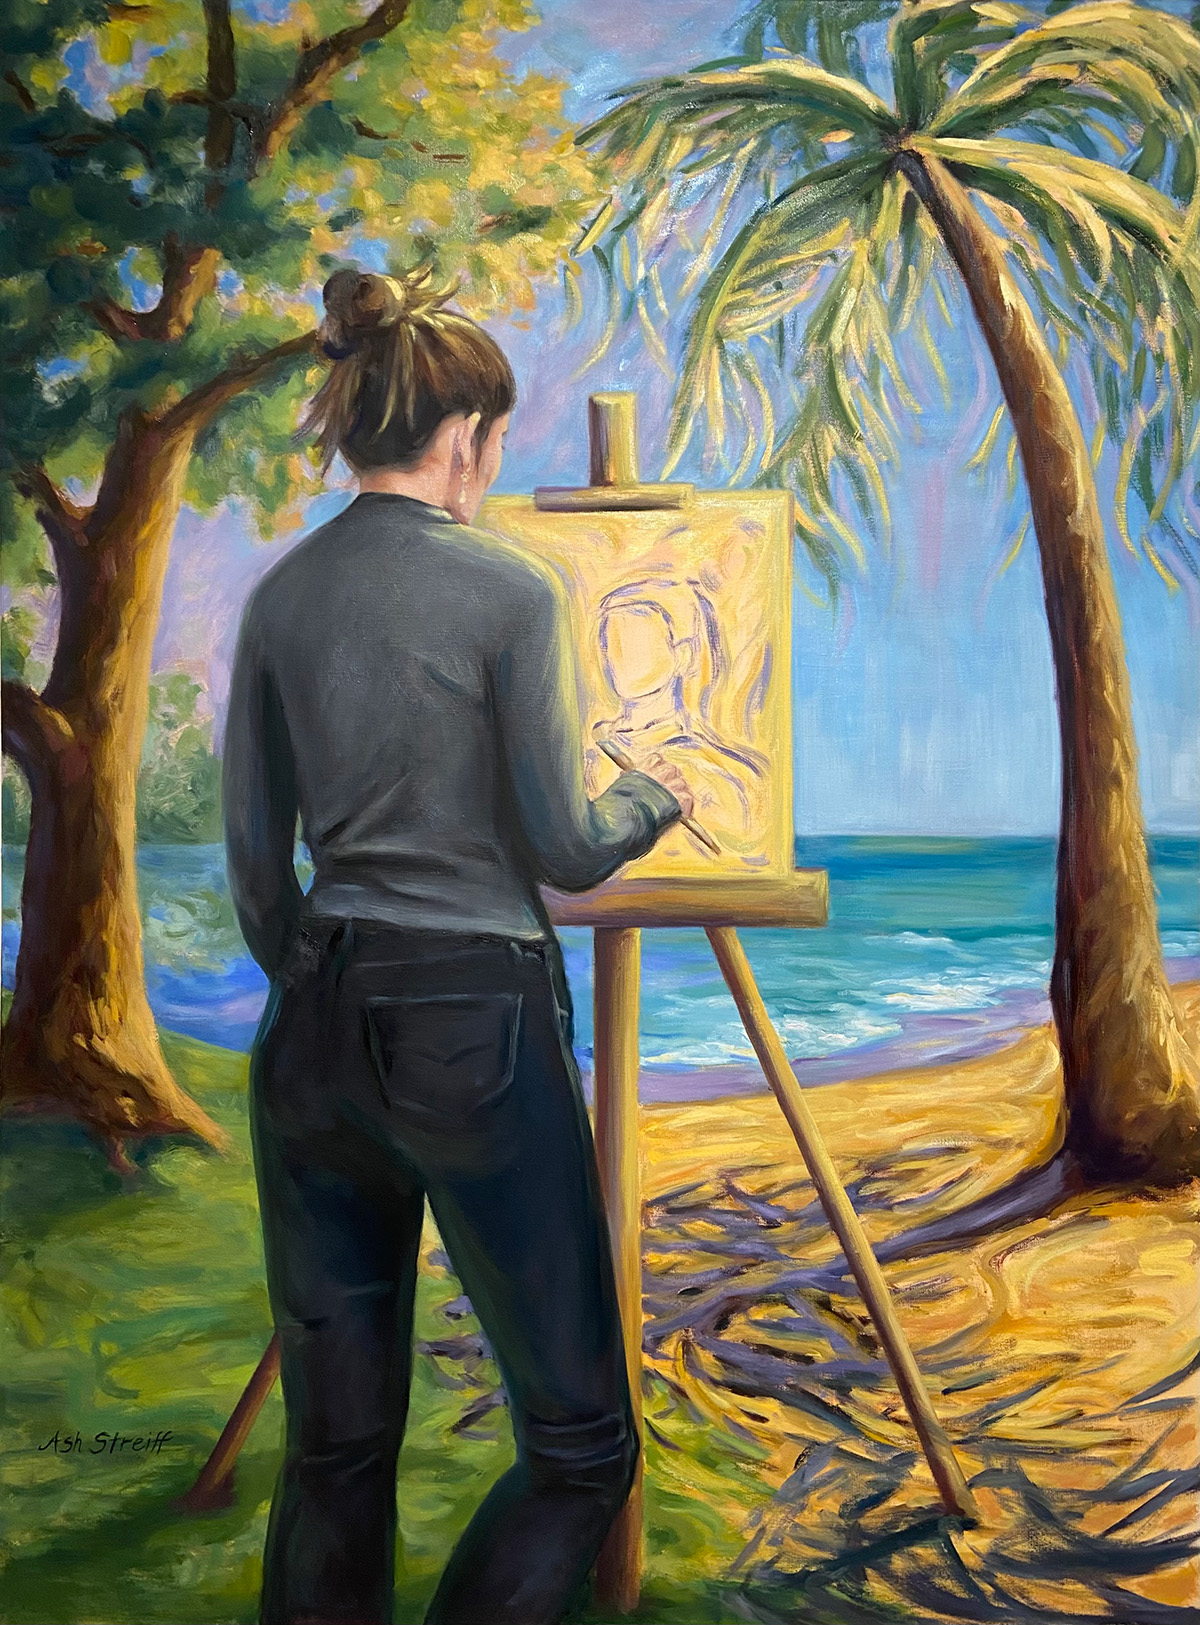 Painting of a woman at an easel with a palm tree to the right and an oak tree to the left.